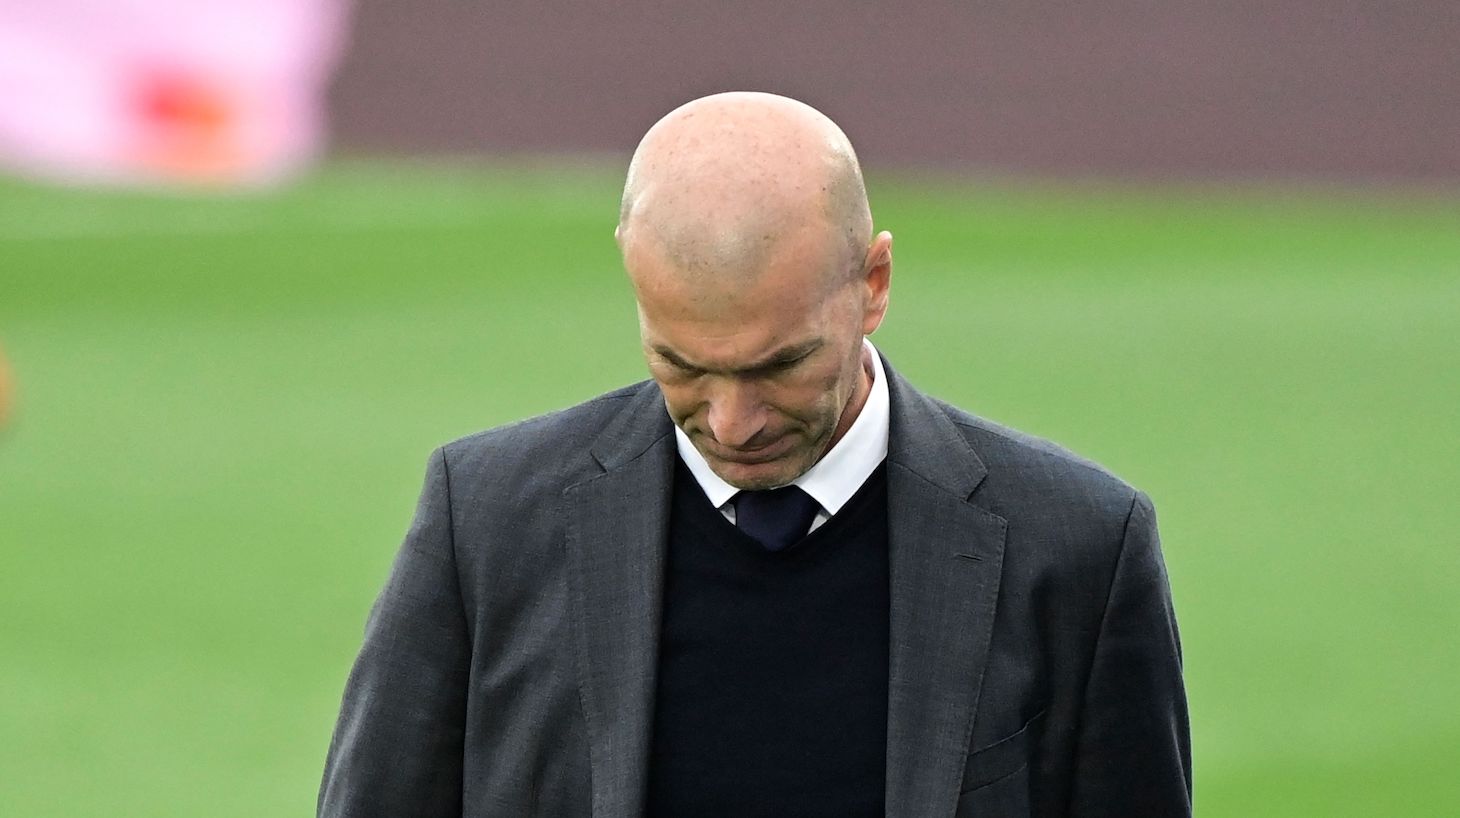 Real Madrid's French coach Zinedine Zidane reacts during the Spanish league football match Real Madrid CF against Villarreal CF at the Alfredo di Stefano stadium in Valdebebas, on the outskirts of Madrid, on May 22, 2021.